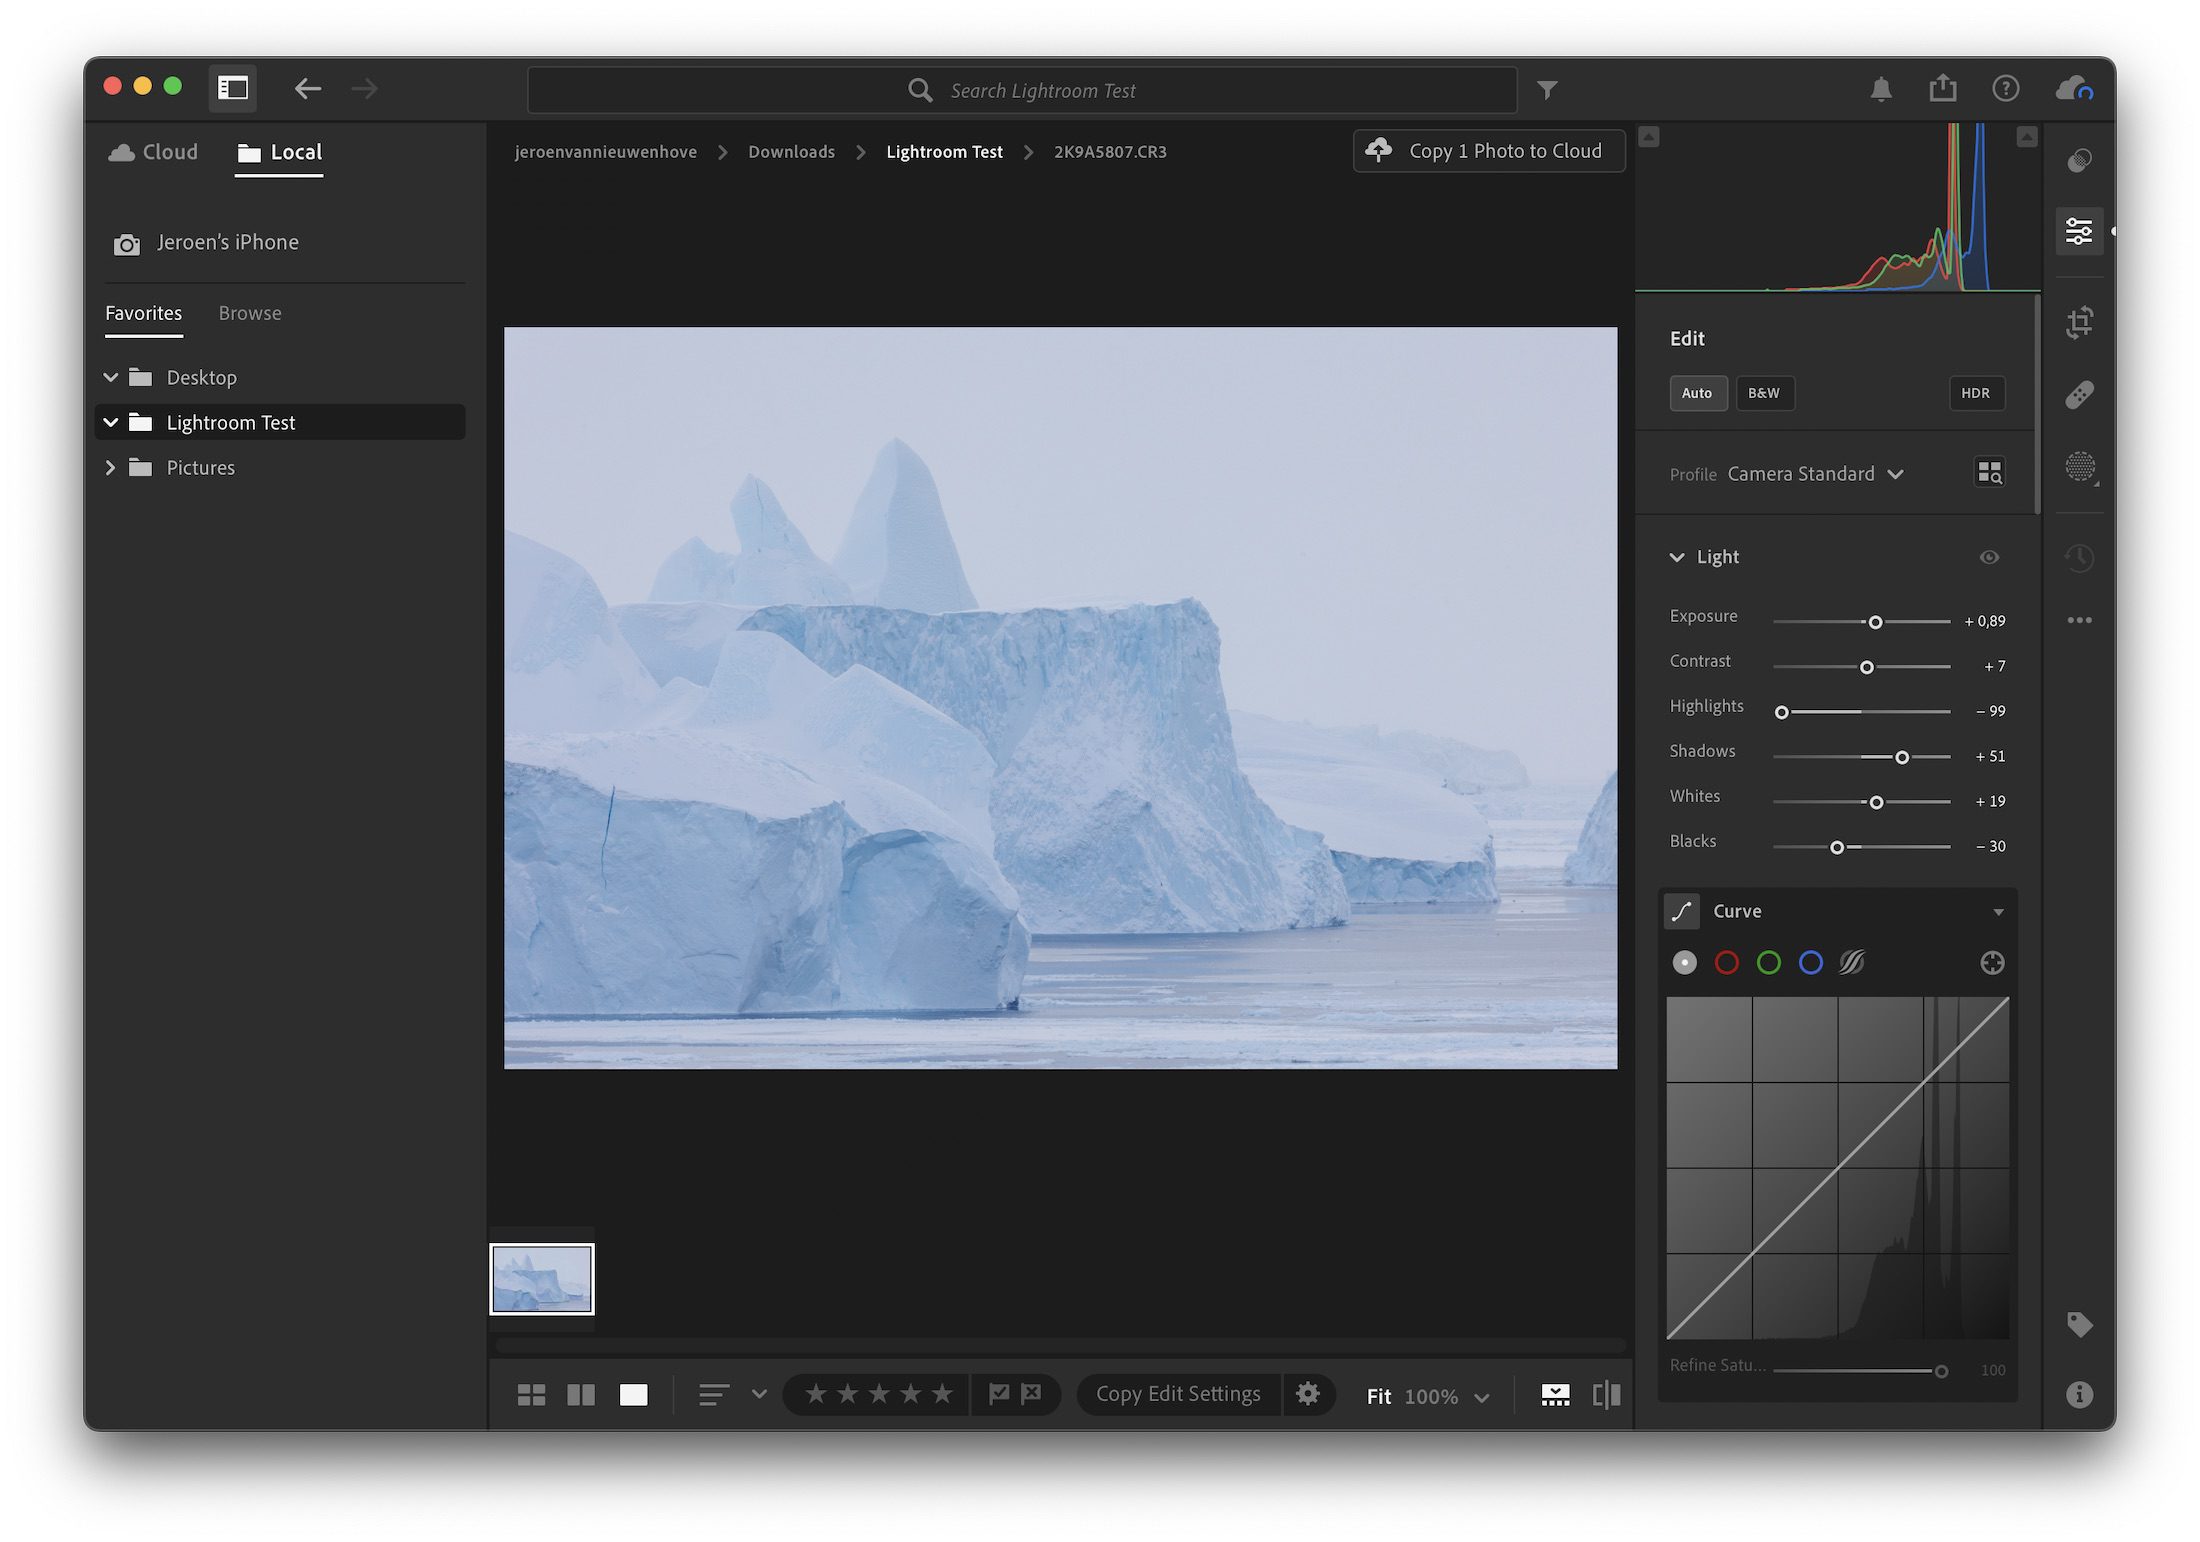 Why I Use Adobe Lightroom (Cloud) – New Update With Local Mode